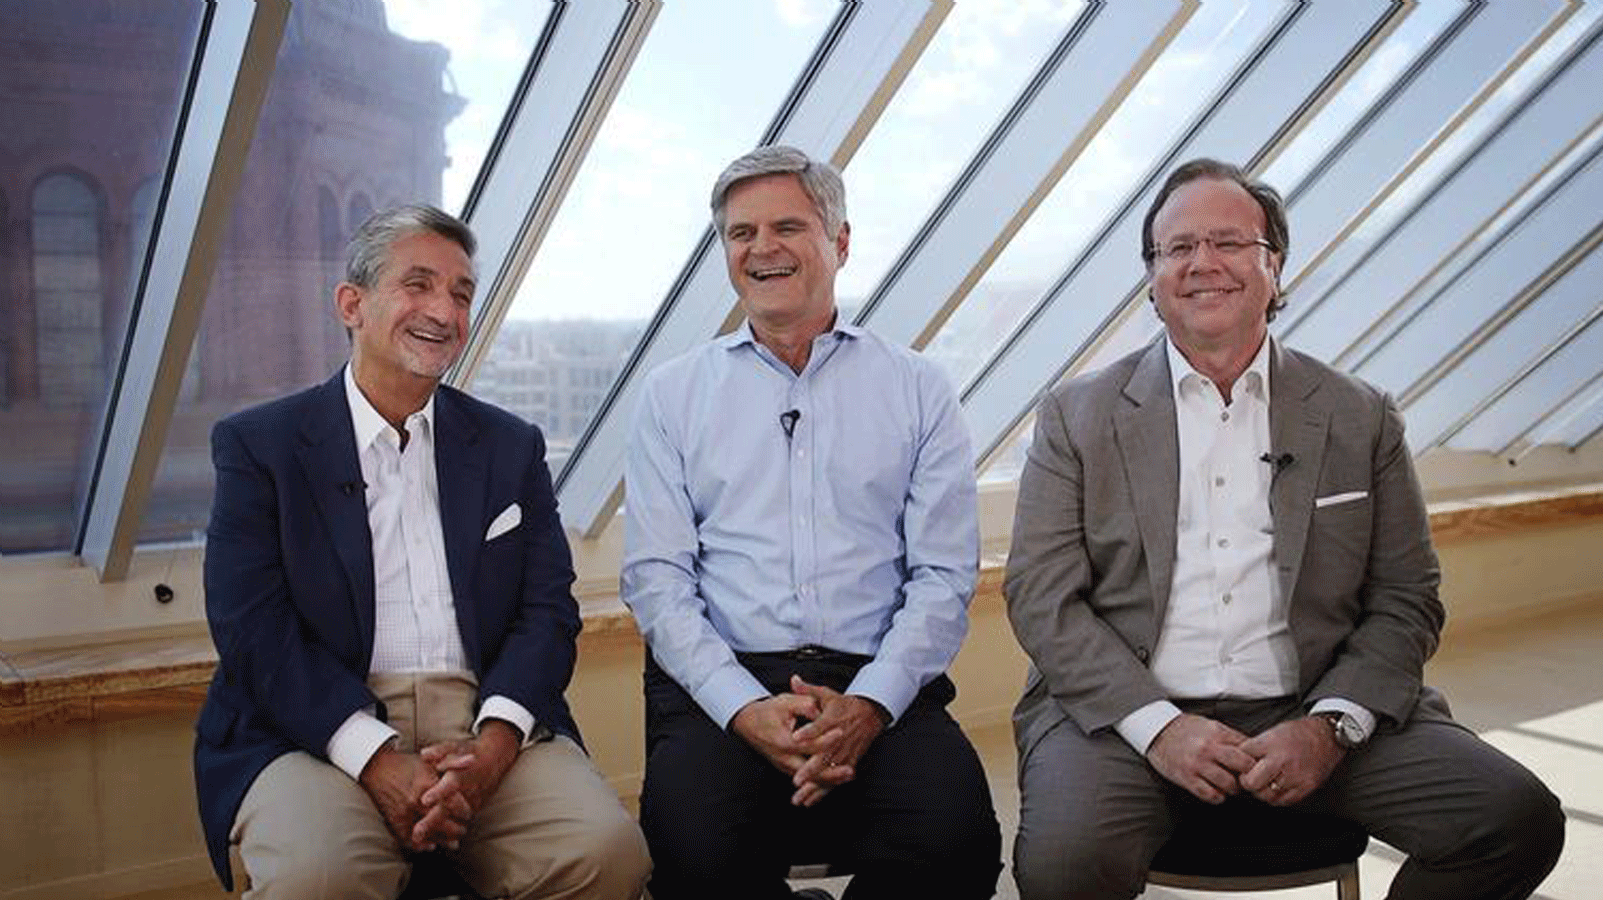 Leonsis, Case, Davis have another $525M to invest, but not in Silicon Valley